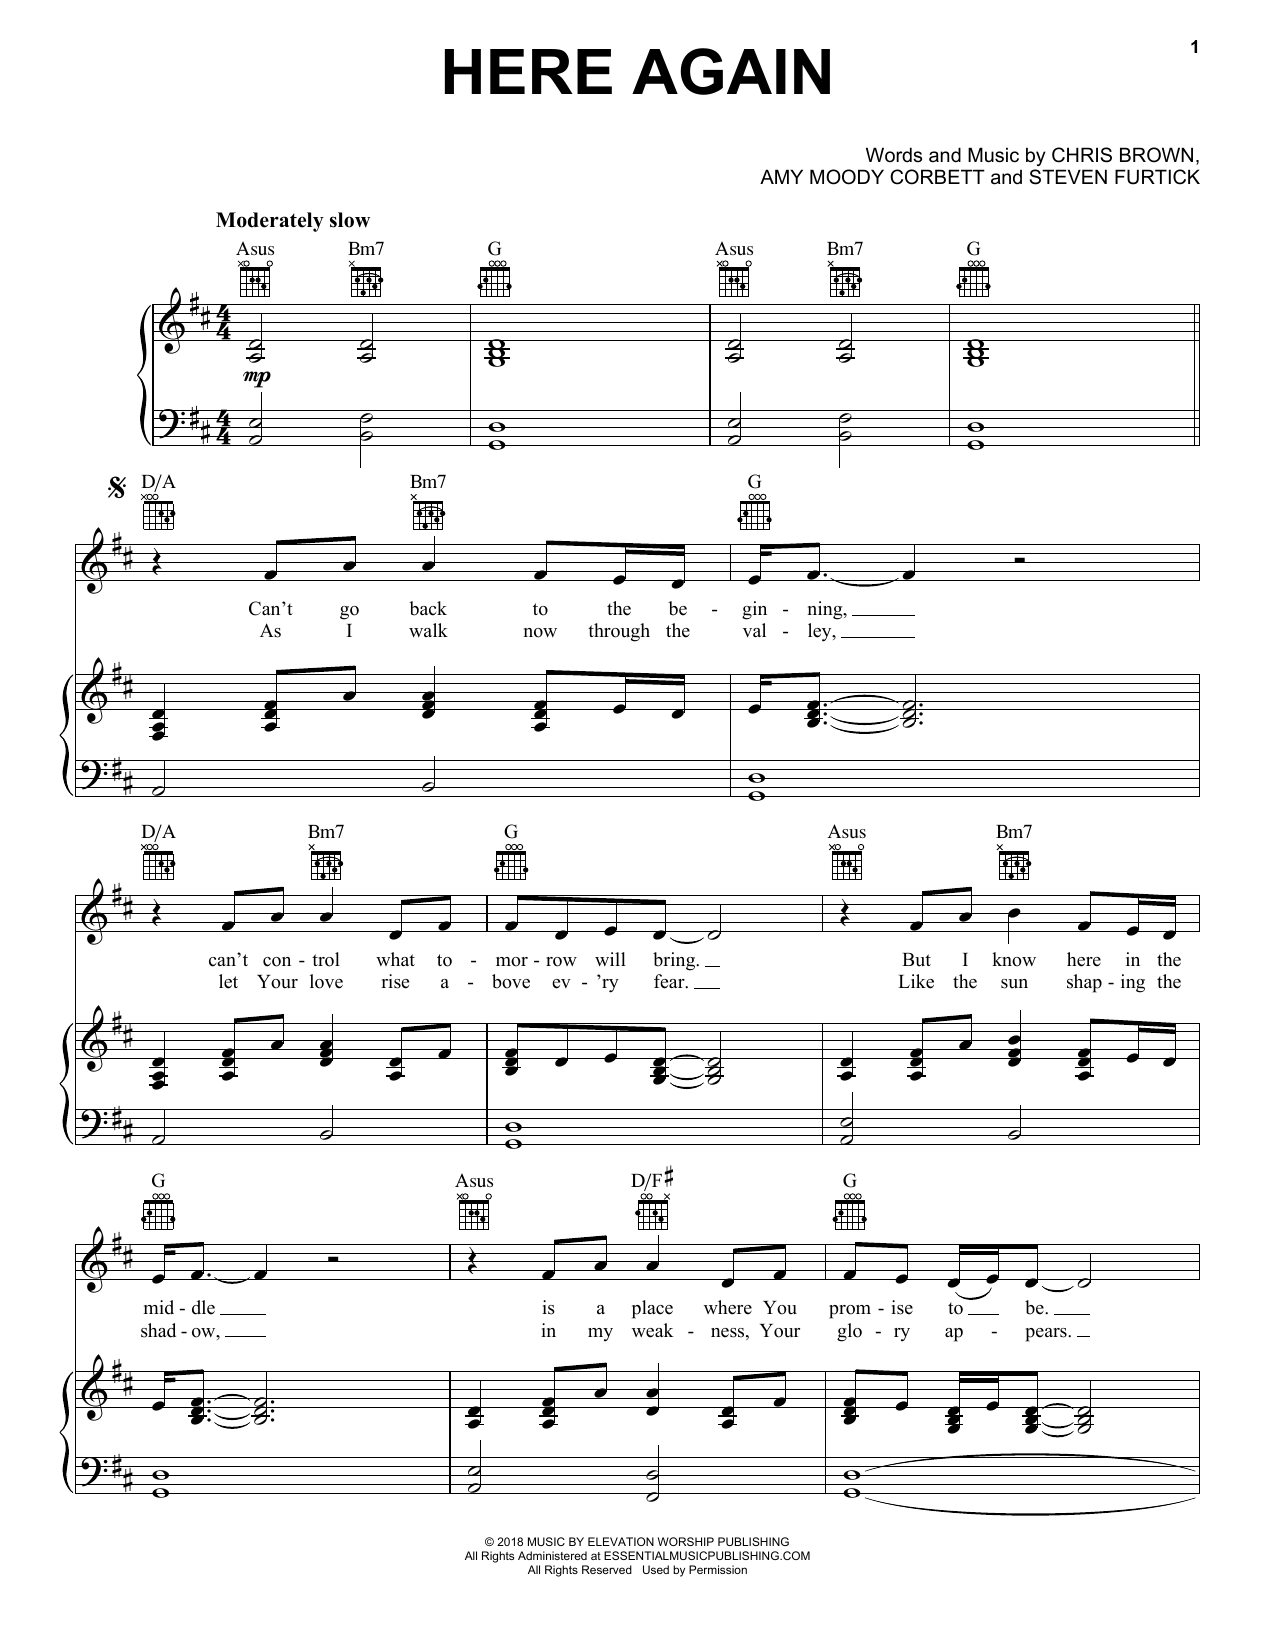 Preview Elevation Worship Here Again Praise & Worship sheet music, note...